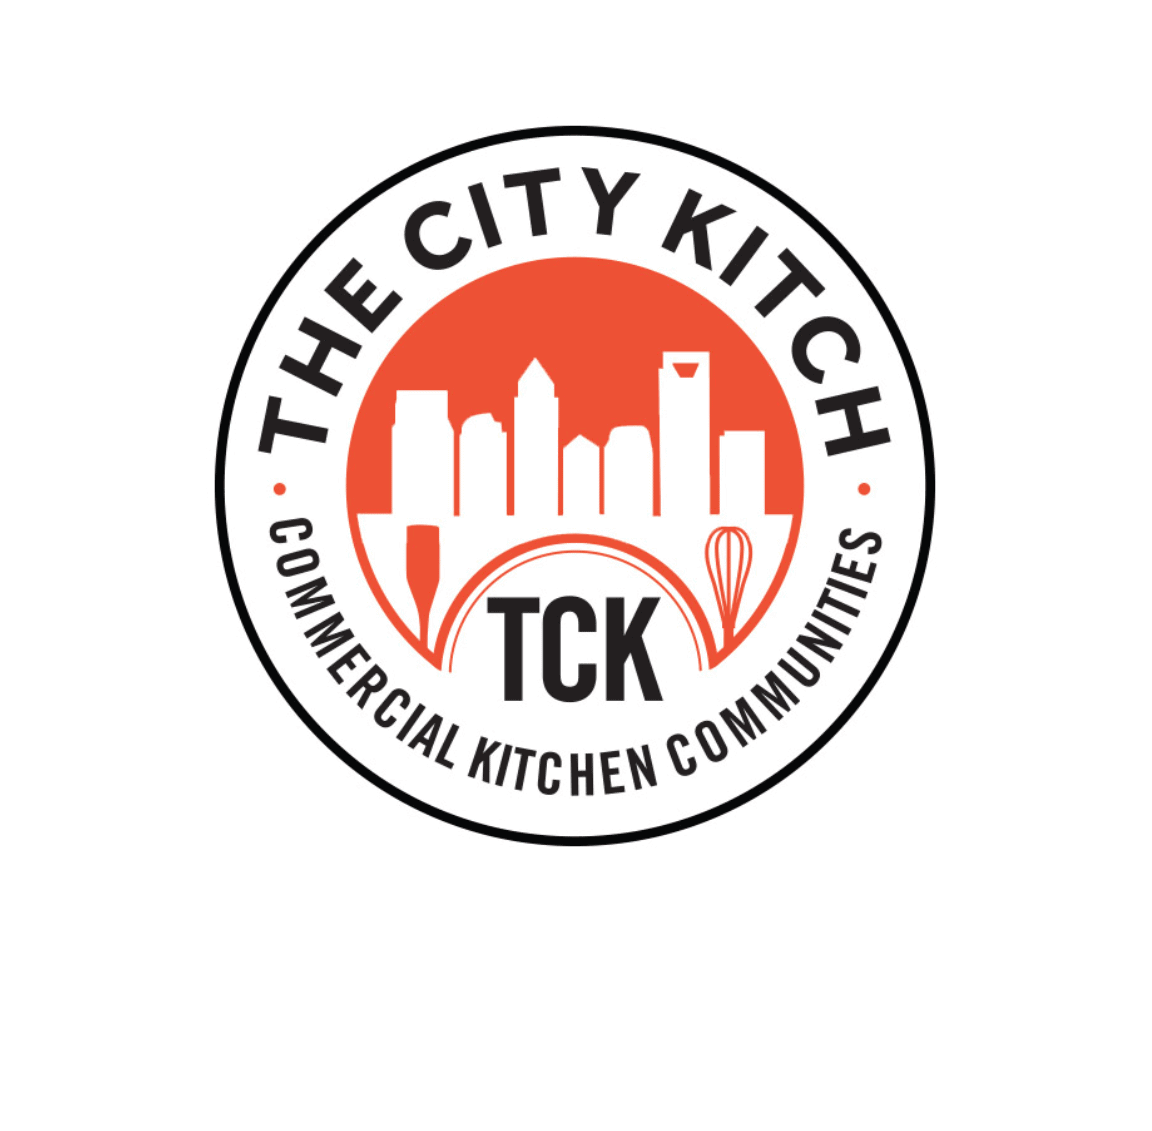 The City Kitch: Commercial Kitchen Communities